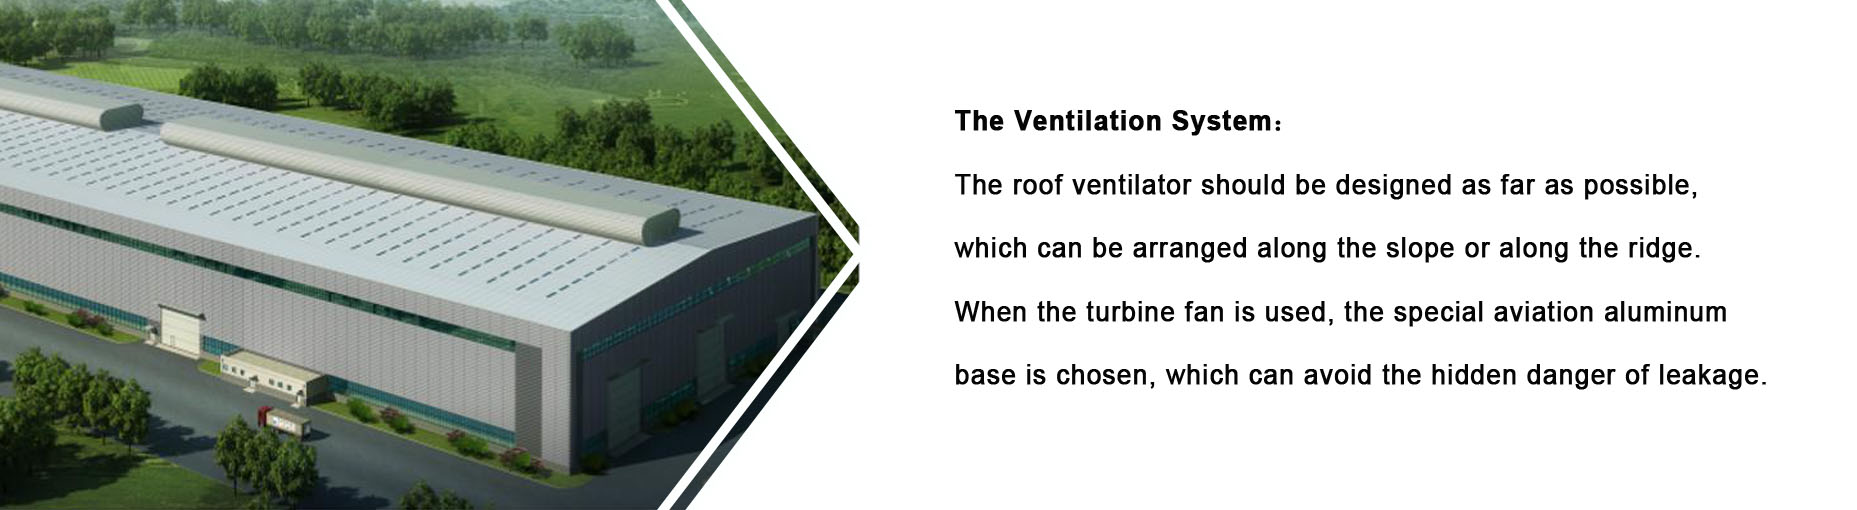 Ventilation system of the steel structure building